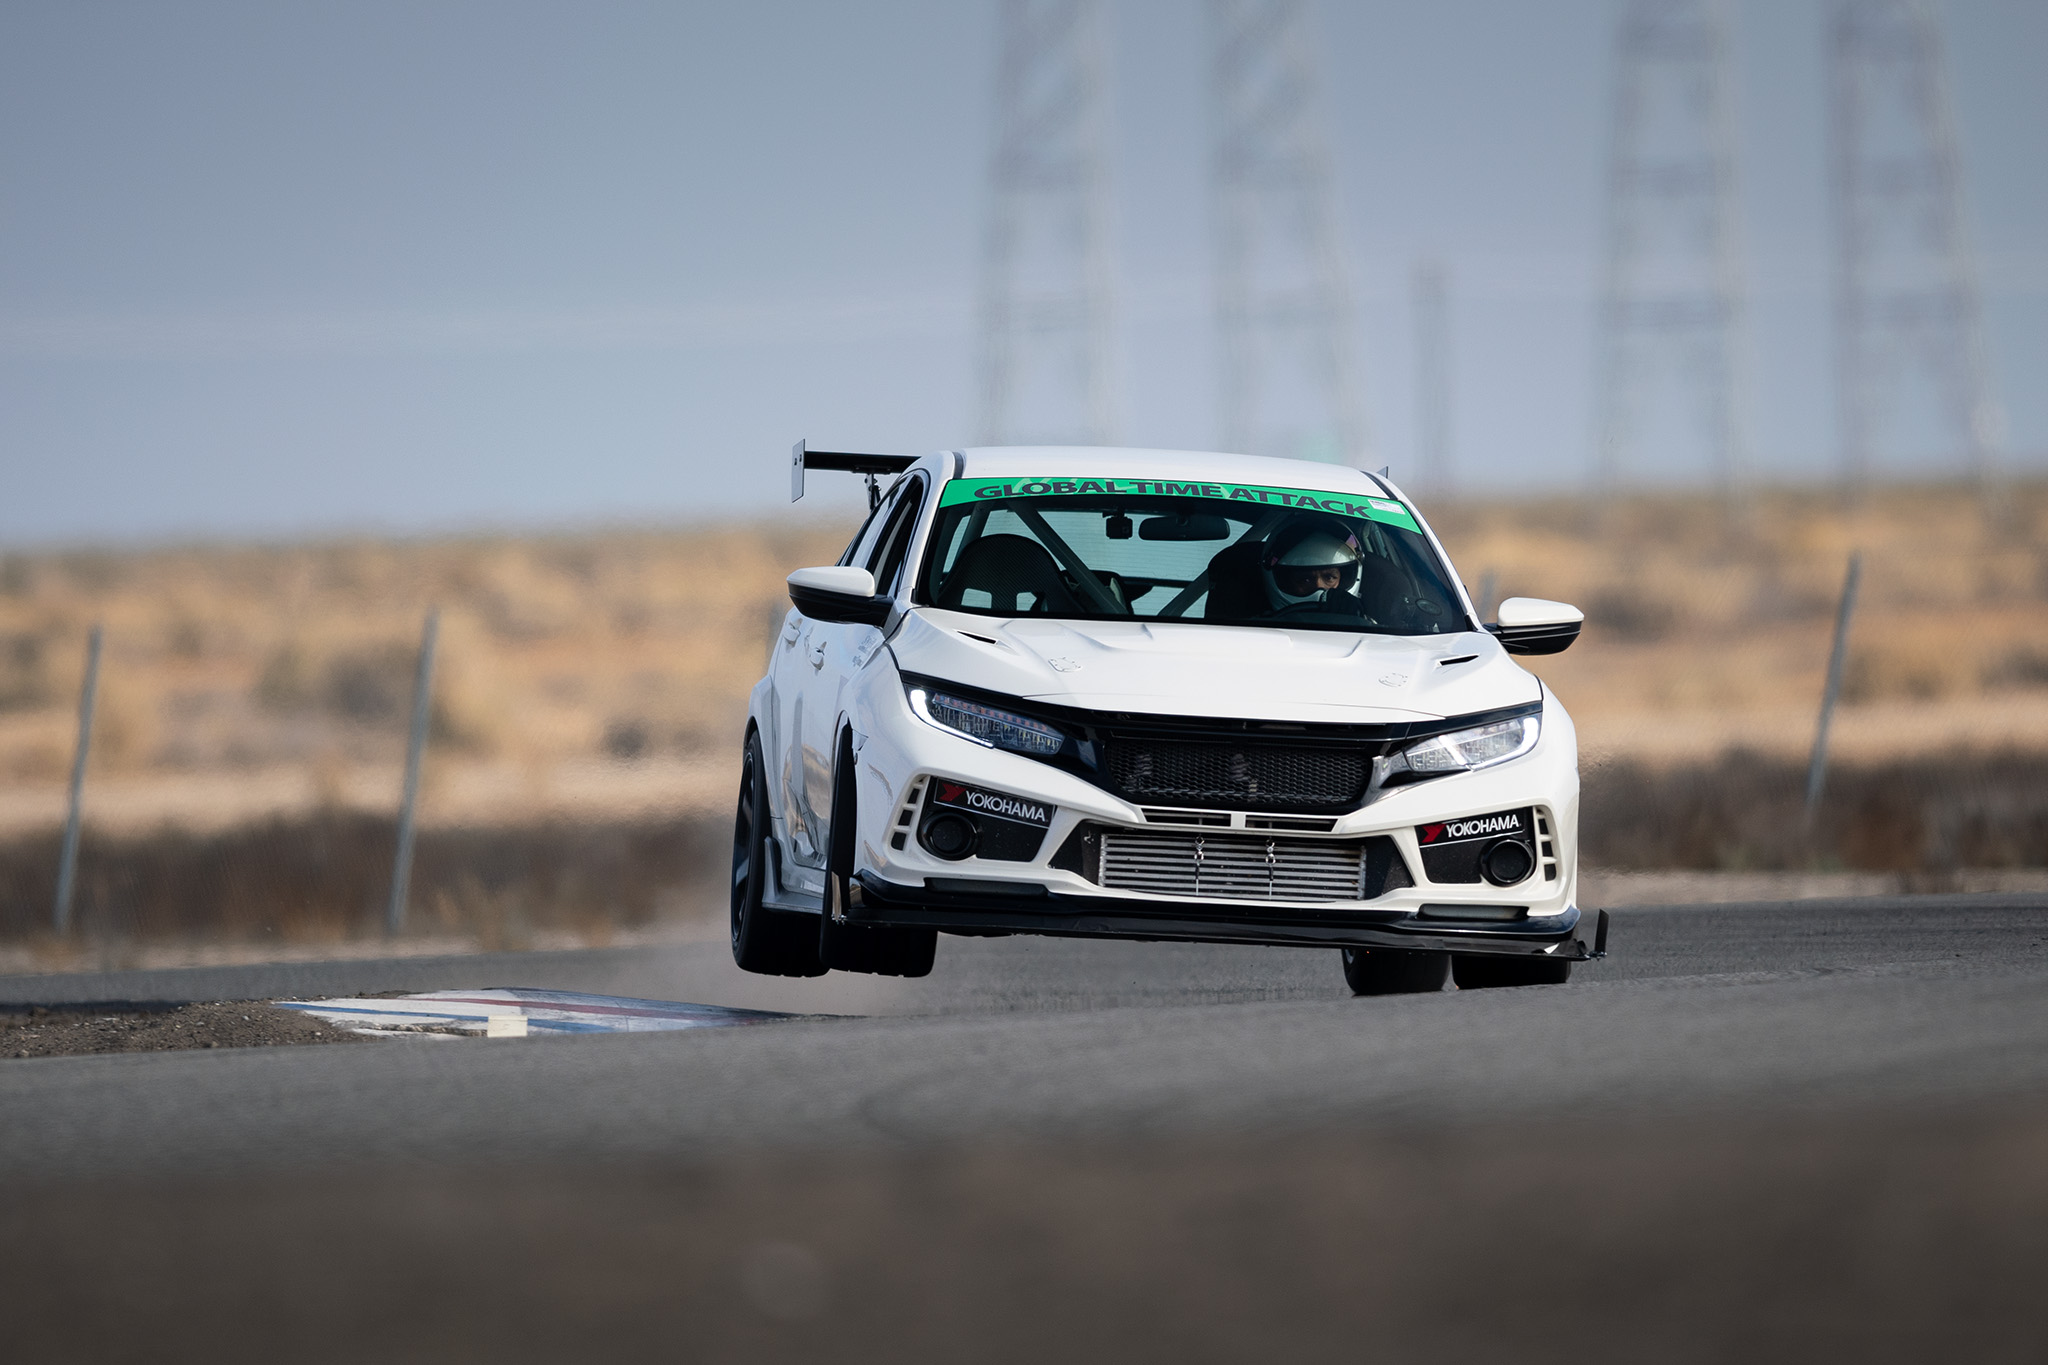 Jose Mejia bouncing his FK8 Honda Civic Type R off the Buttonwillow curbing at Global Time Attack finals, motorsports photography by Luke Munnell